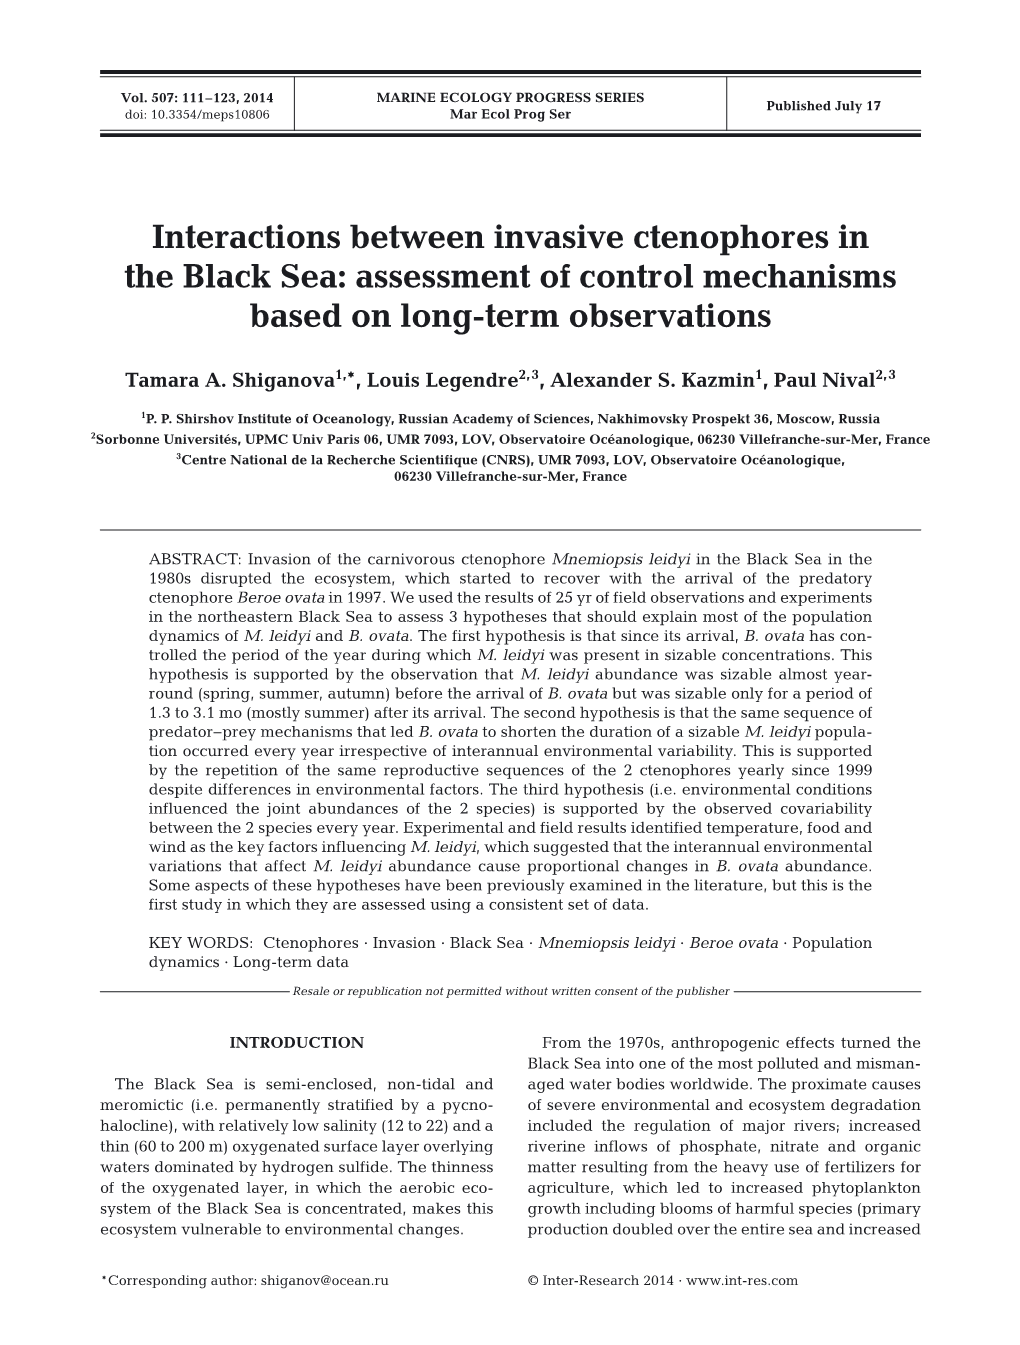 Interactions Between Invasive Ctenophores in the Black Sea: Assessment of Control Mechanisms Based on Long-Term Observations